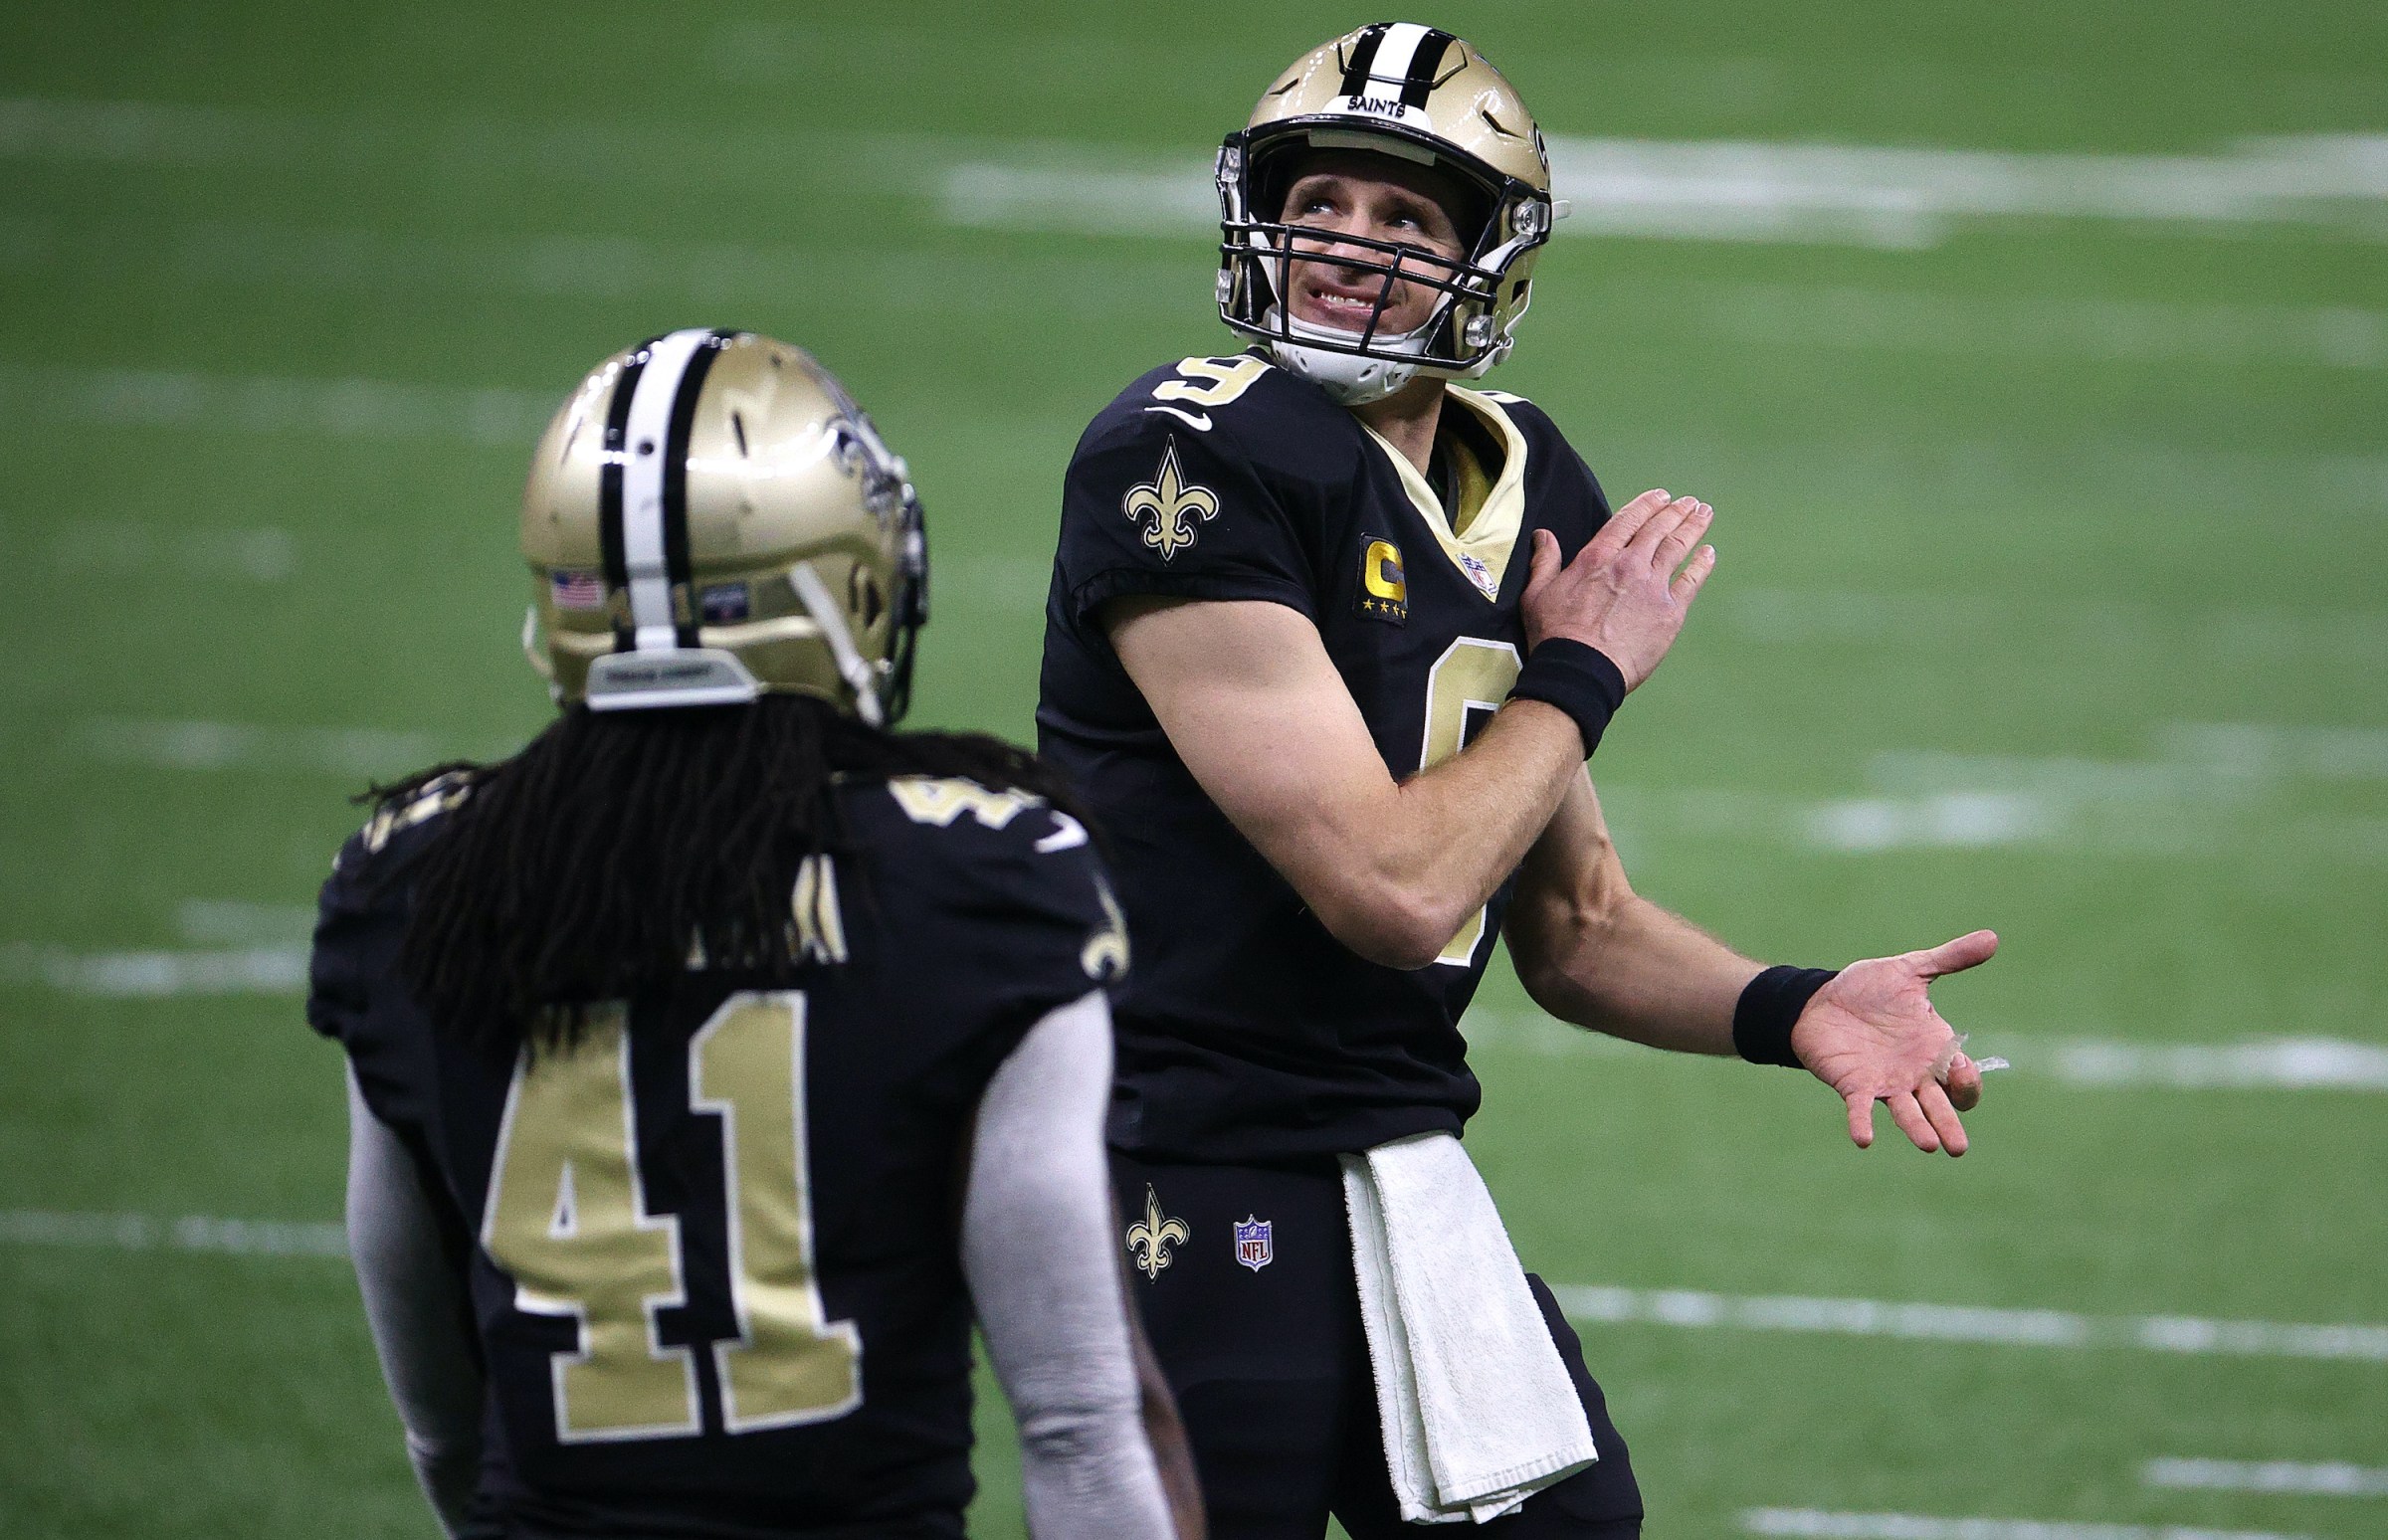 Drew Brees #9 of the New Orleans Saints reacts to a play against the Tampa Bay Buccaneers during the first quarter in the NFC Divisional Playoff game at Mercedes Benz Superdome on January 17, 2021 in New Orleans, Louisiana.